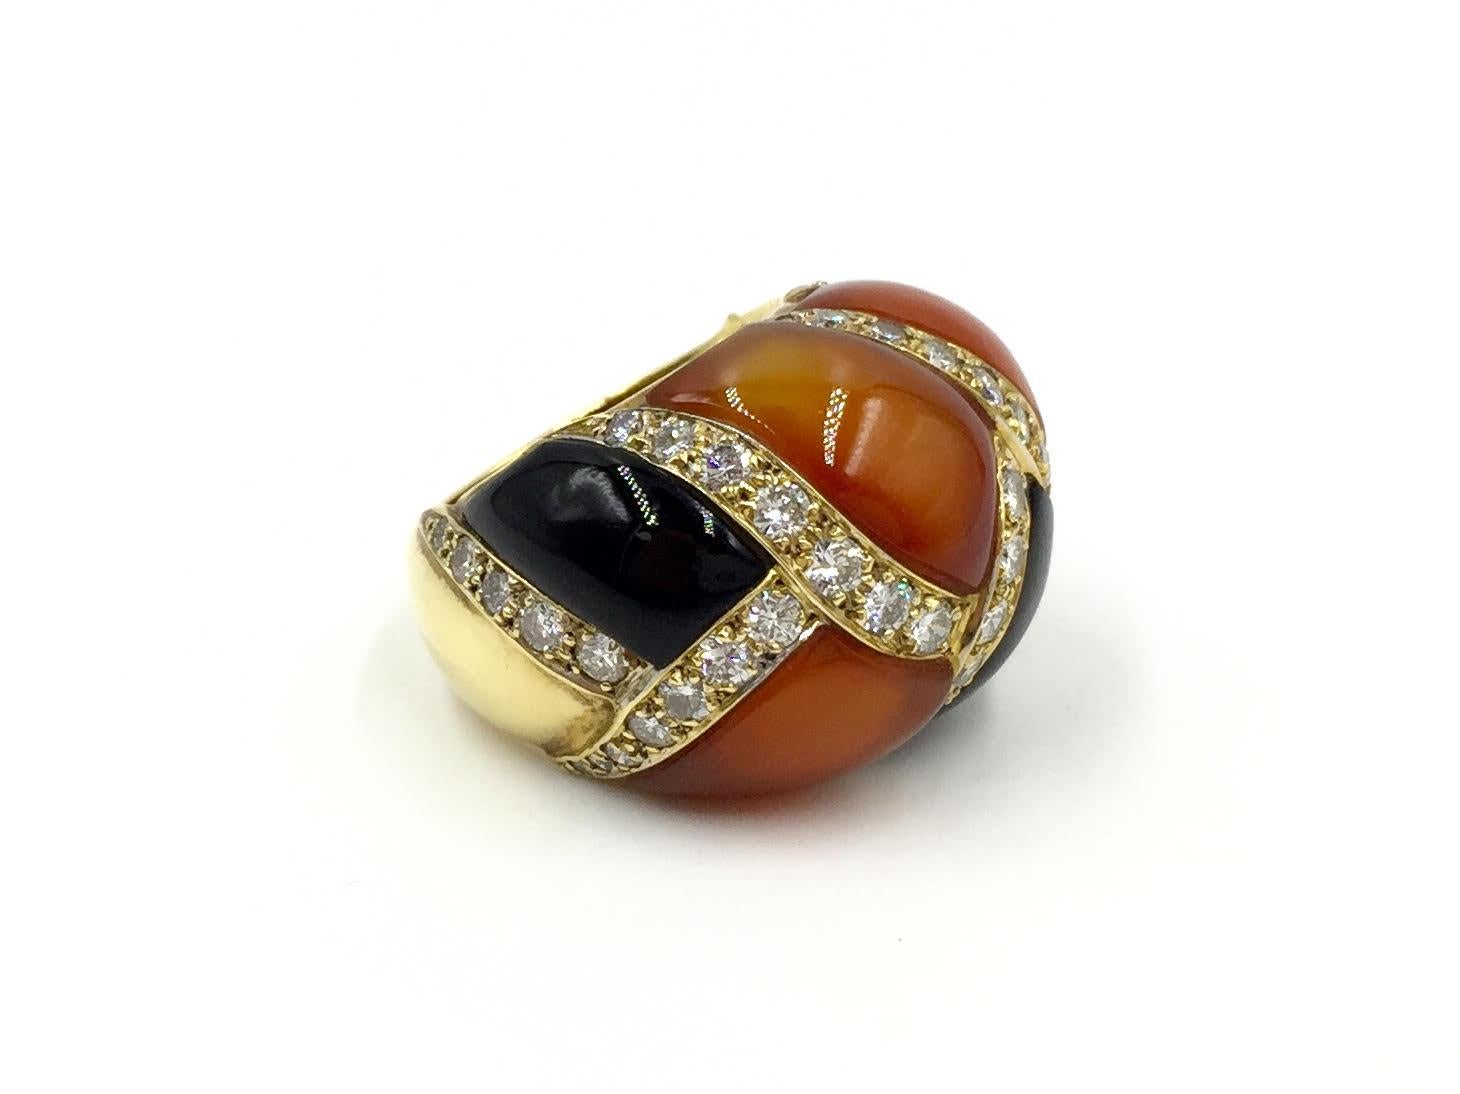 Brilliant diamonds, warm carnelian and glossy onyx come together beautifully in this unique cocktail ring by Charles Turi. Made in 18k yellow gold, this ring has a total diamond weight of 2.16 carats, approximately F color, VS clarity, that are set